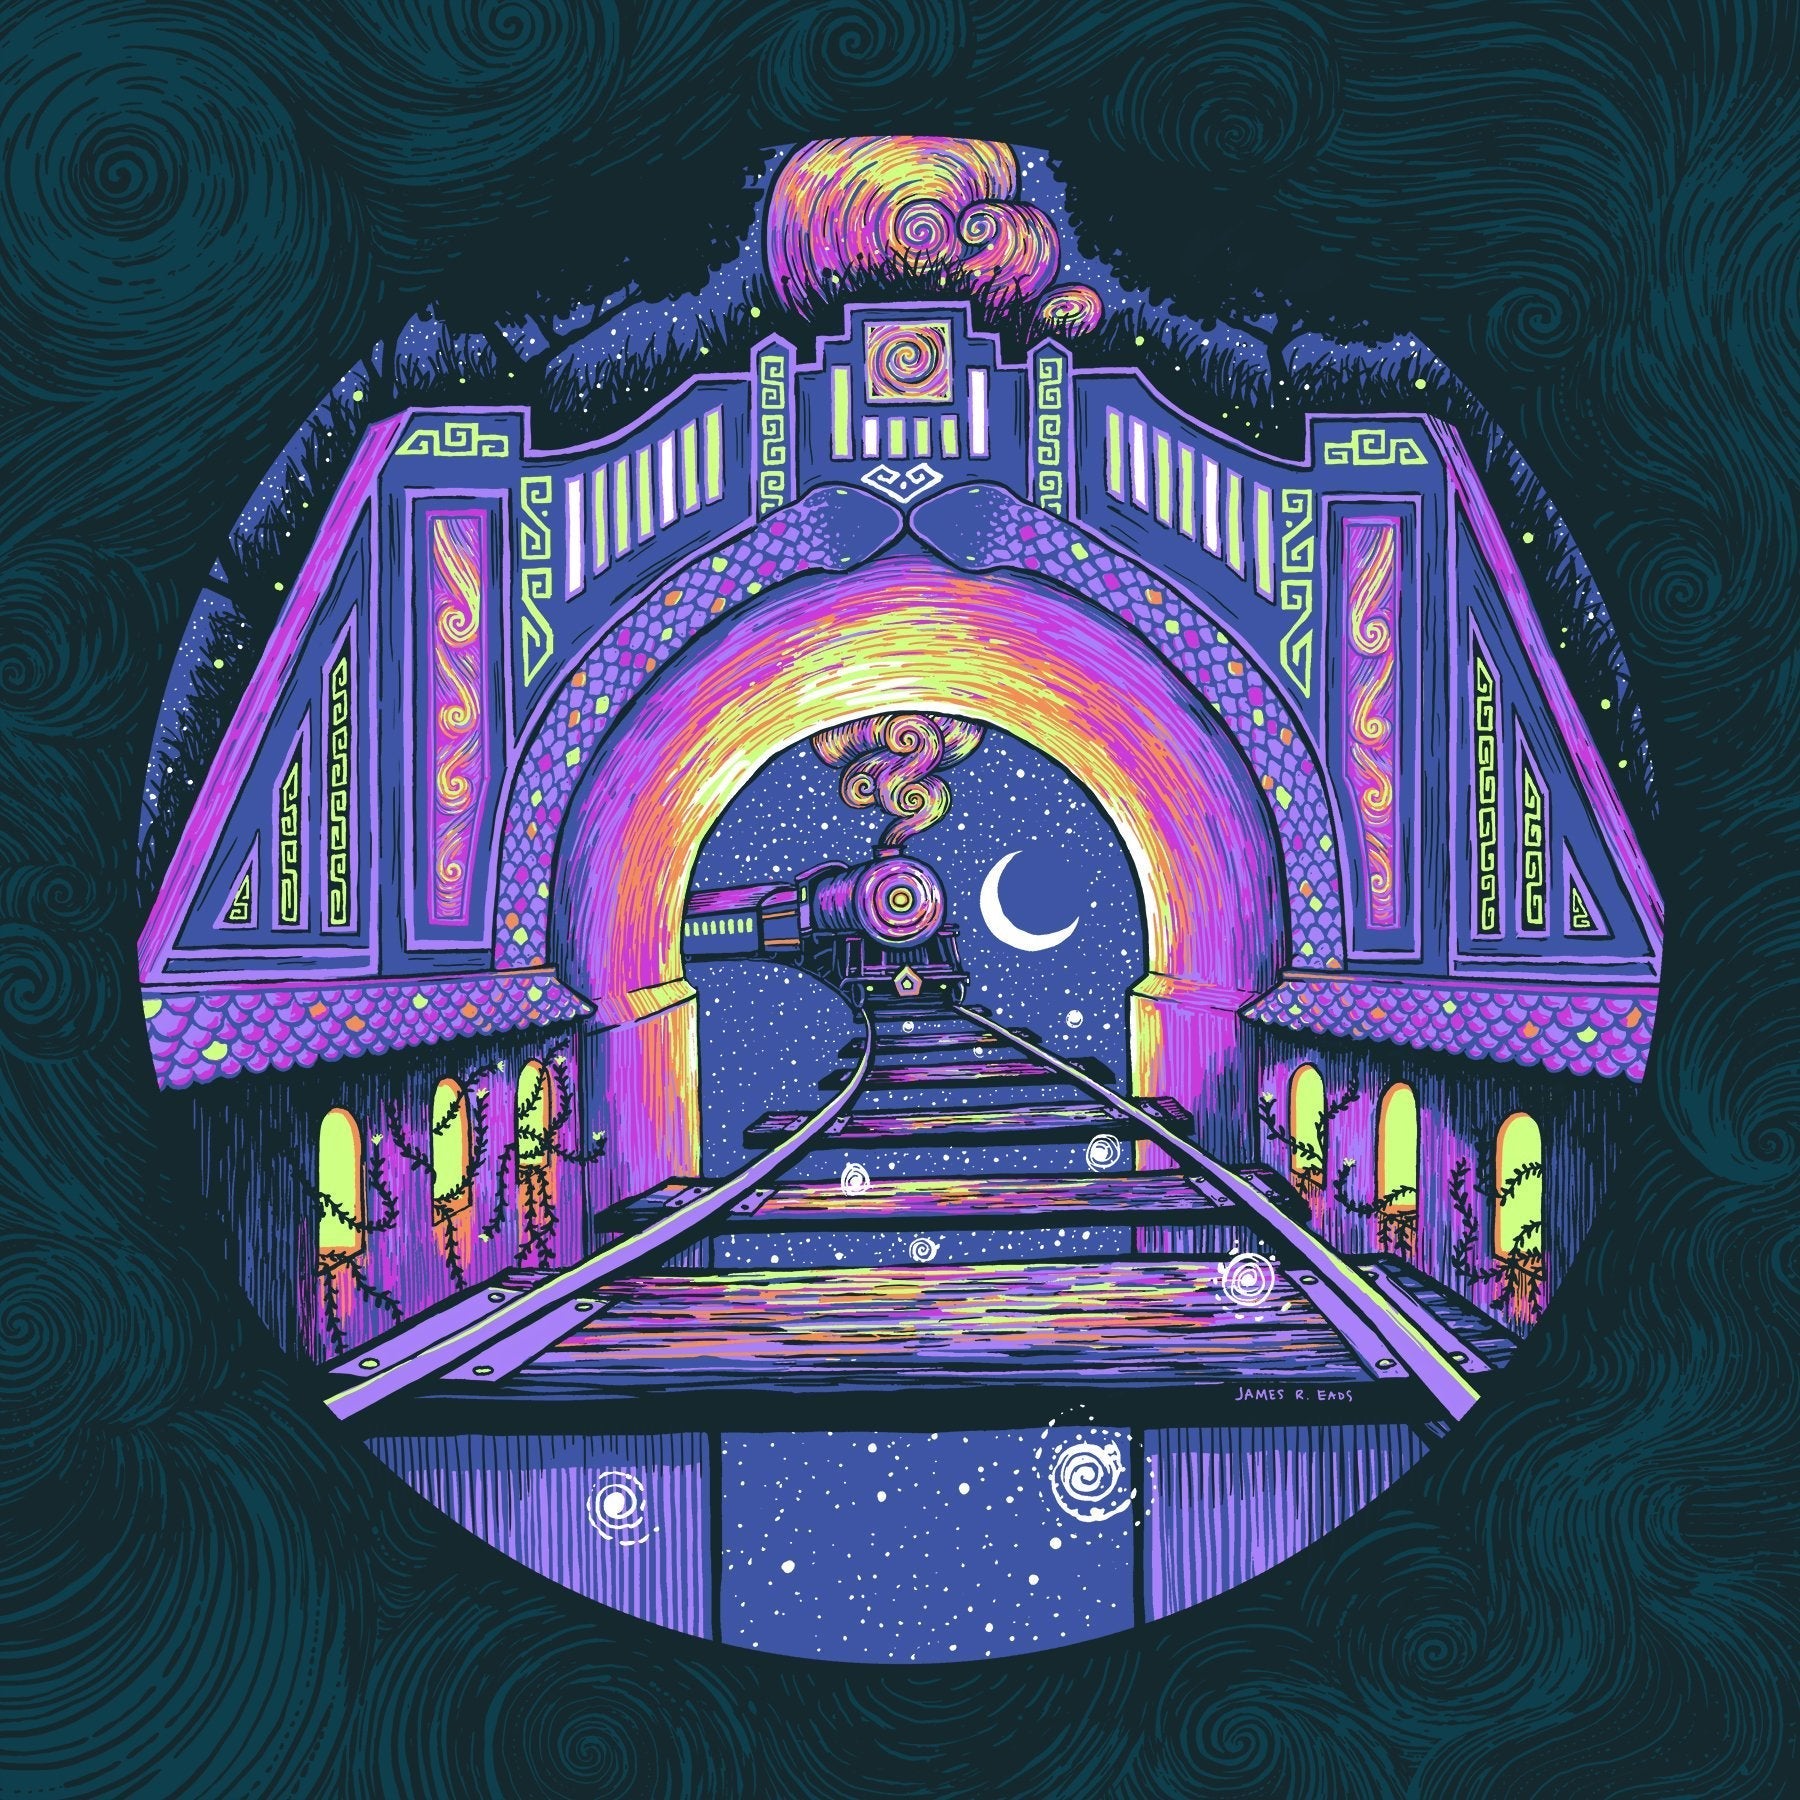 The Train Nightmare (Available at Posters 4 People) James R. Eads